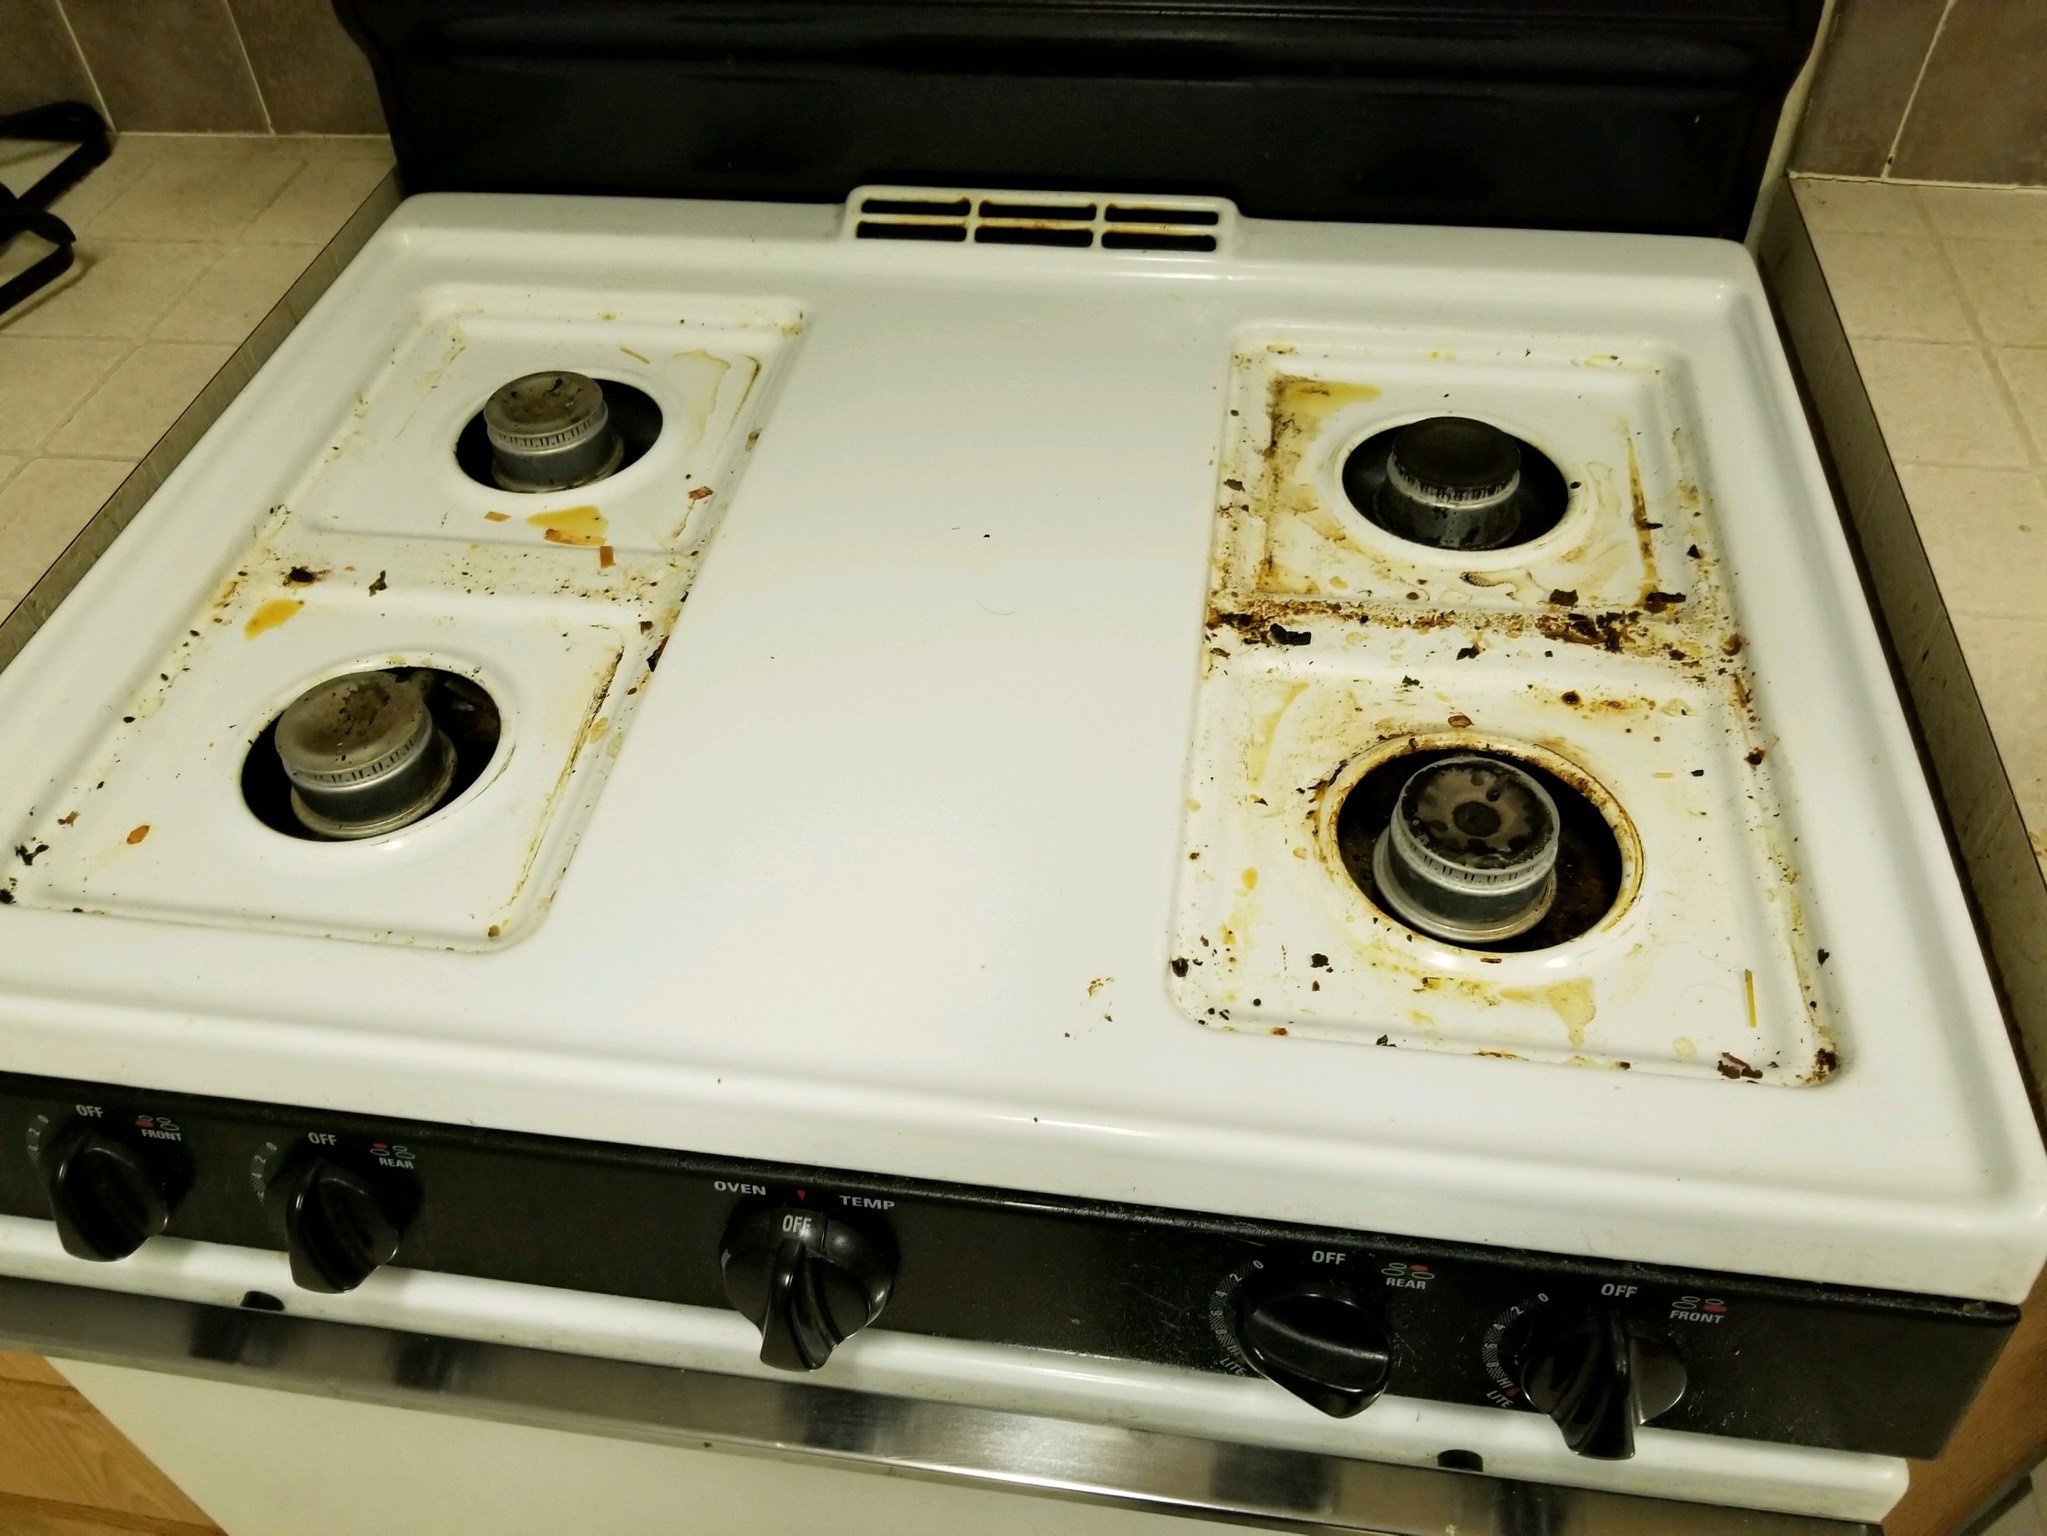 stove top before being cleaned